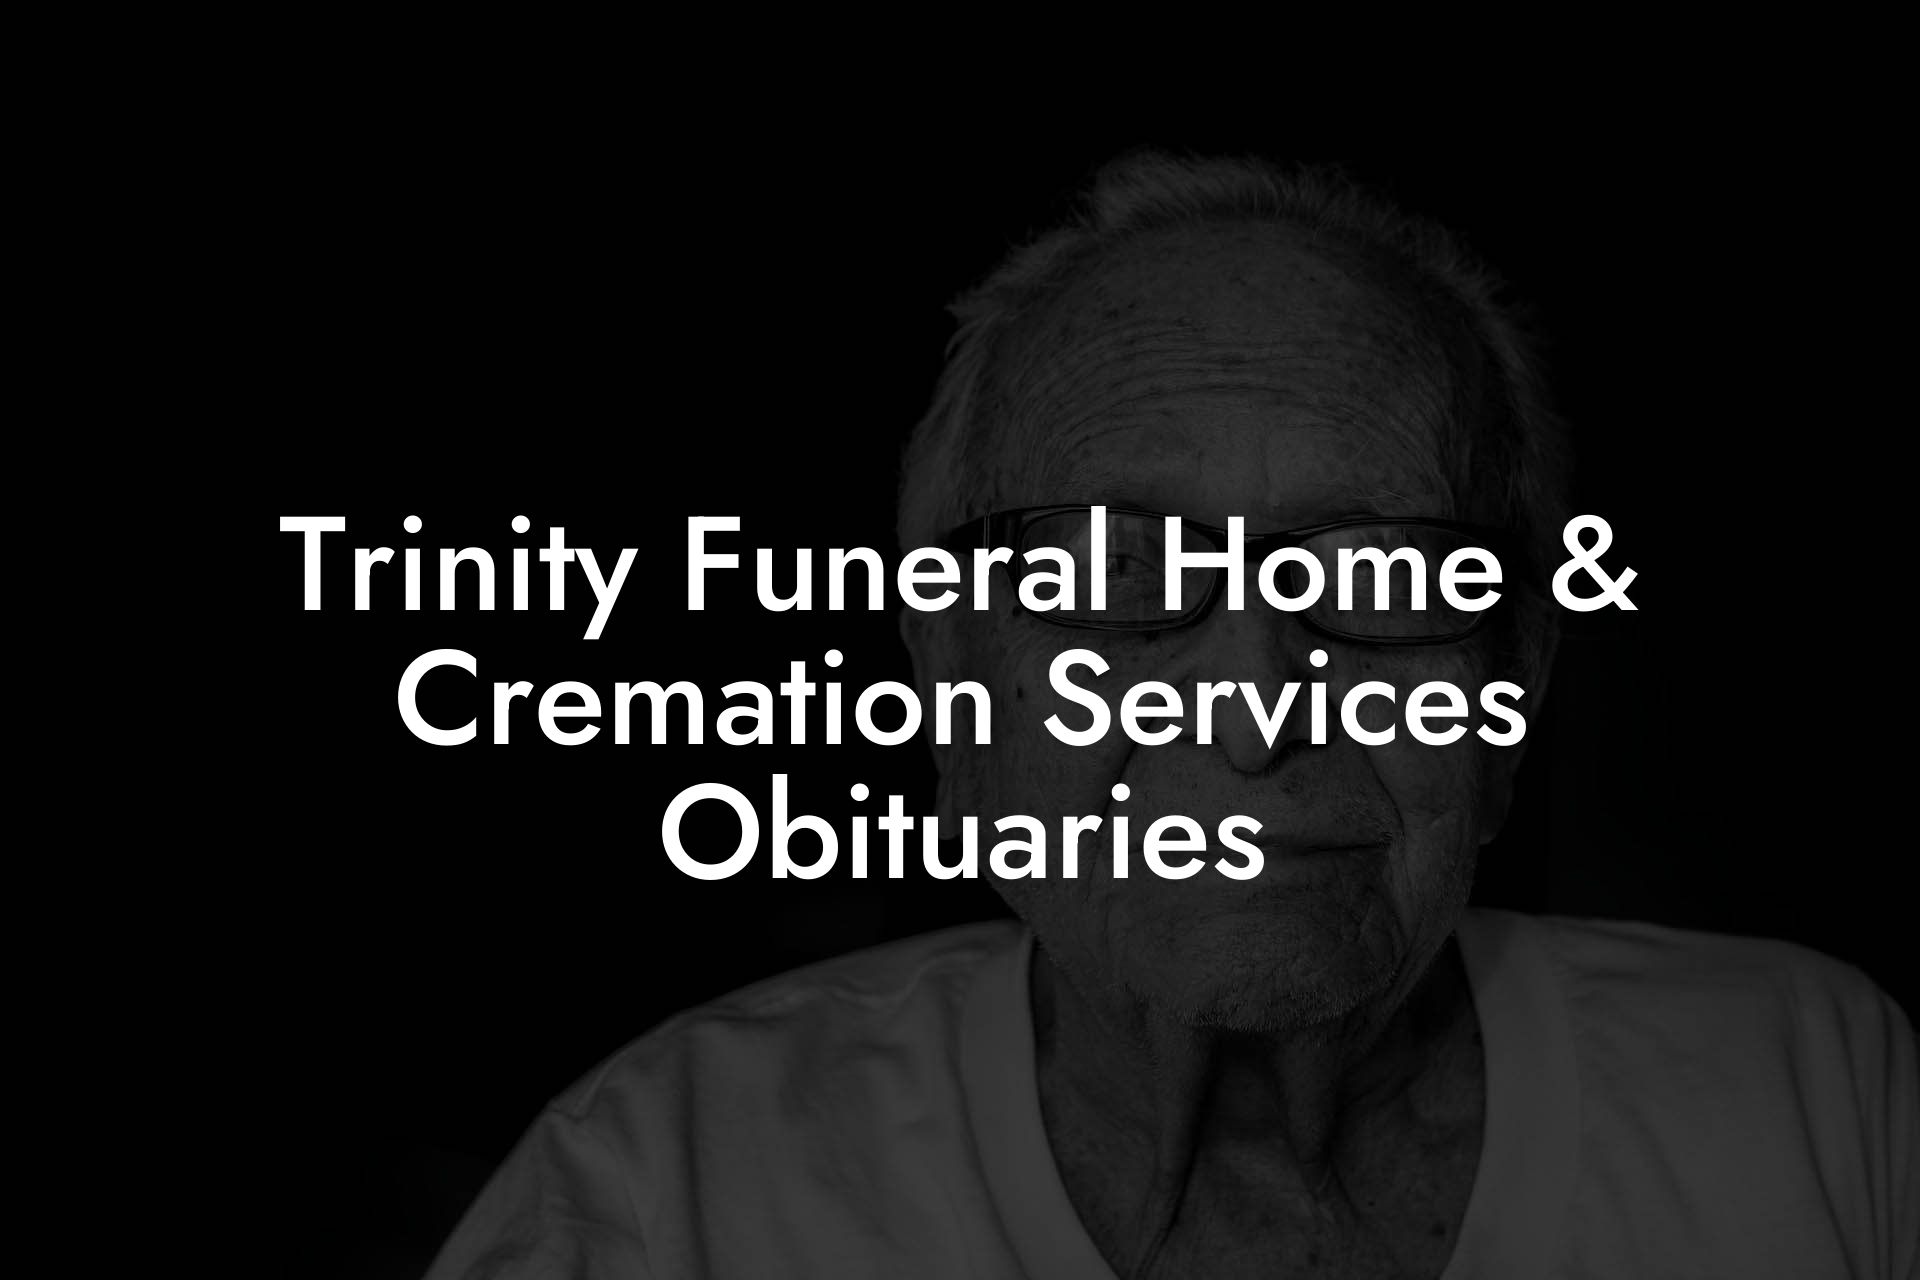 Trinity Funeral Home & Cremation Services Obituaries